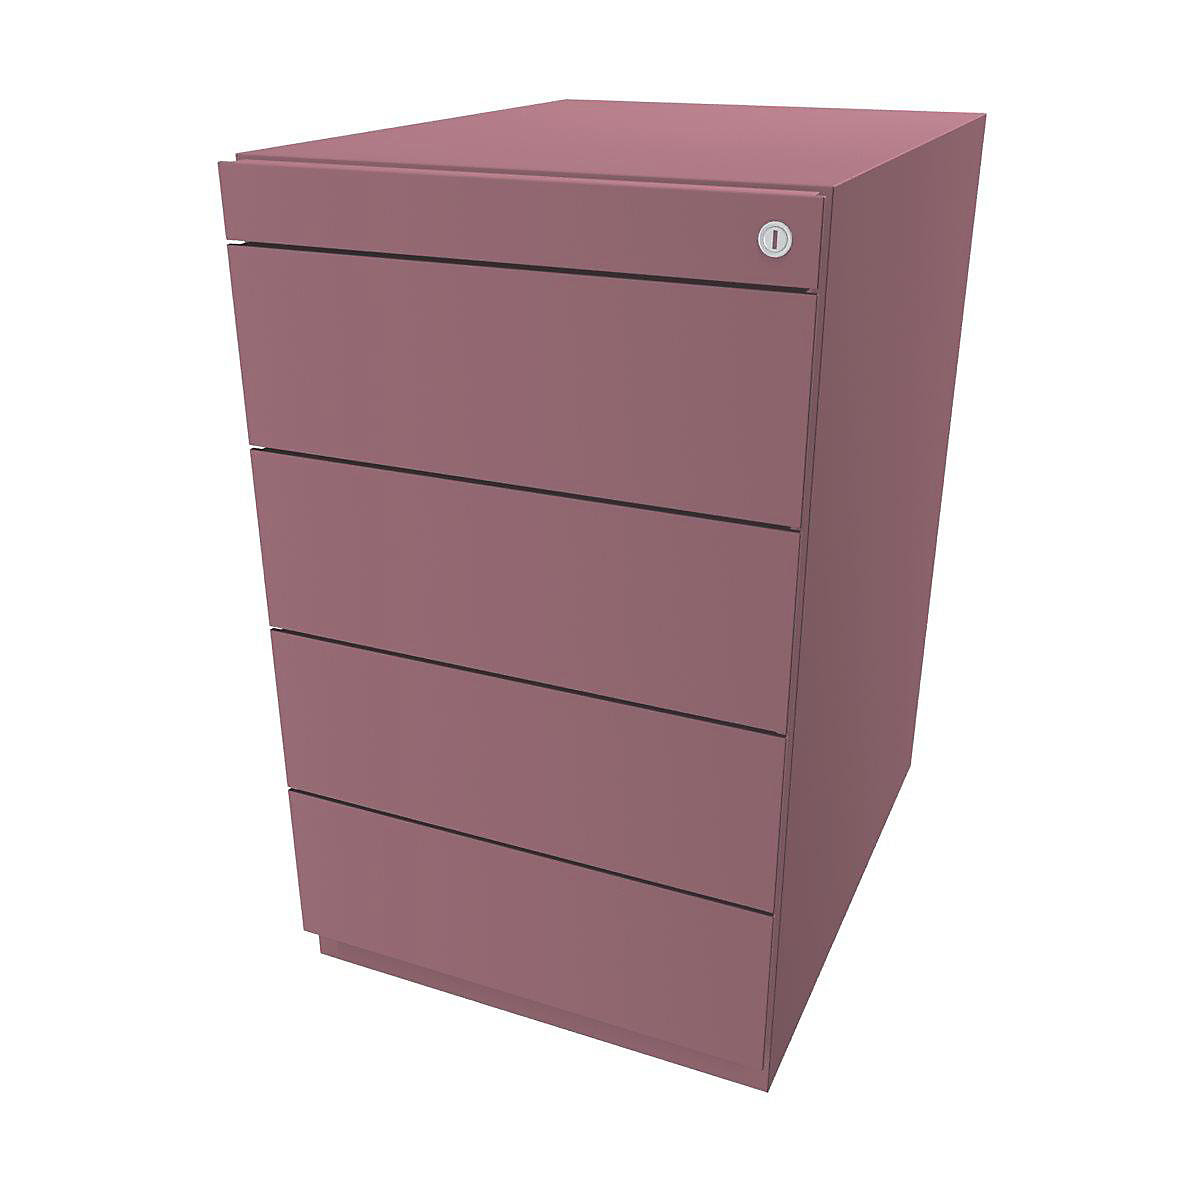 Note™ fixed pedestal, with 4 universal drawers - BISLEY